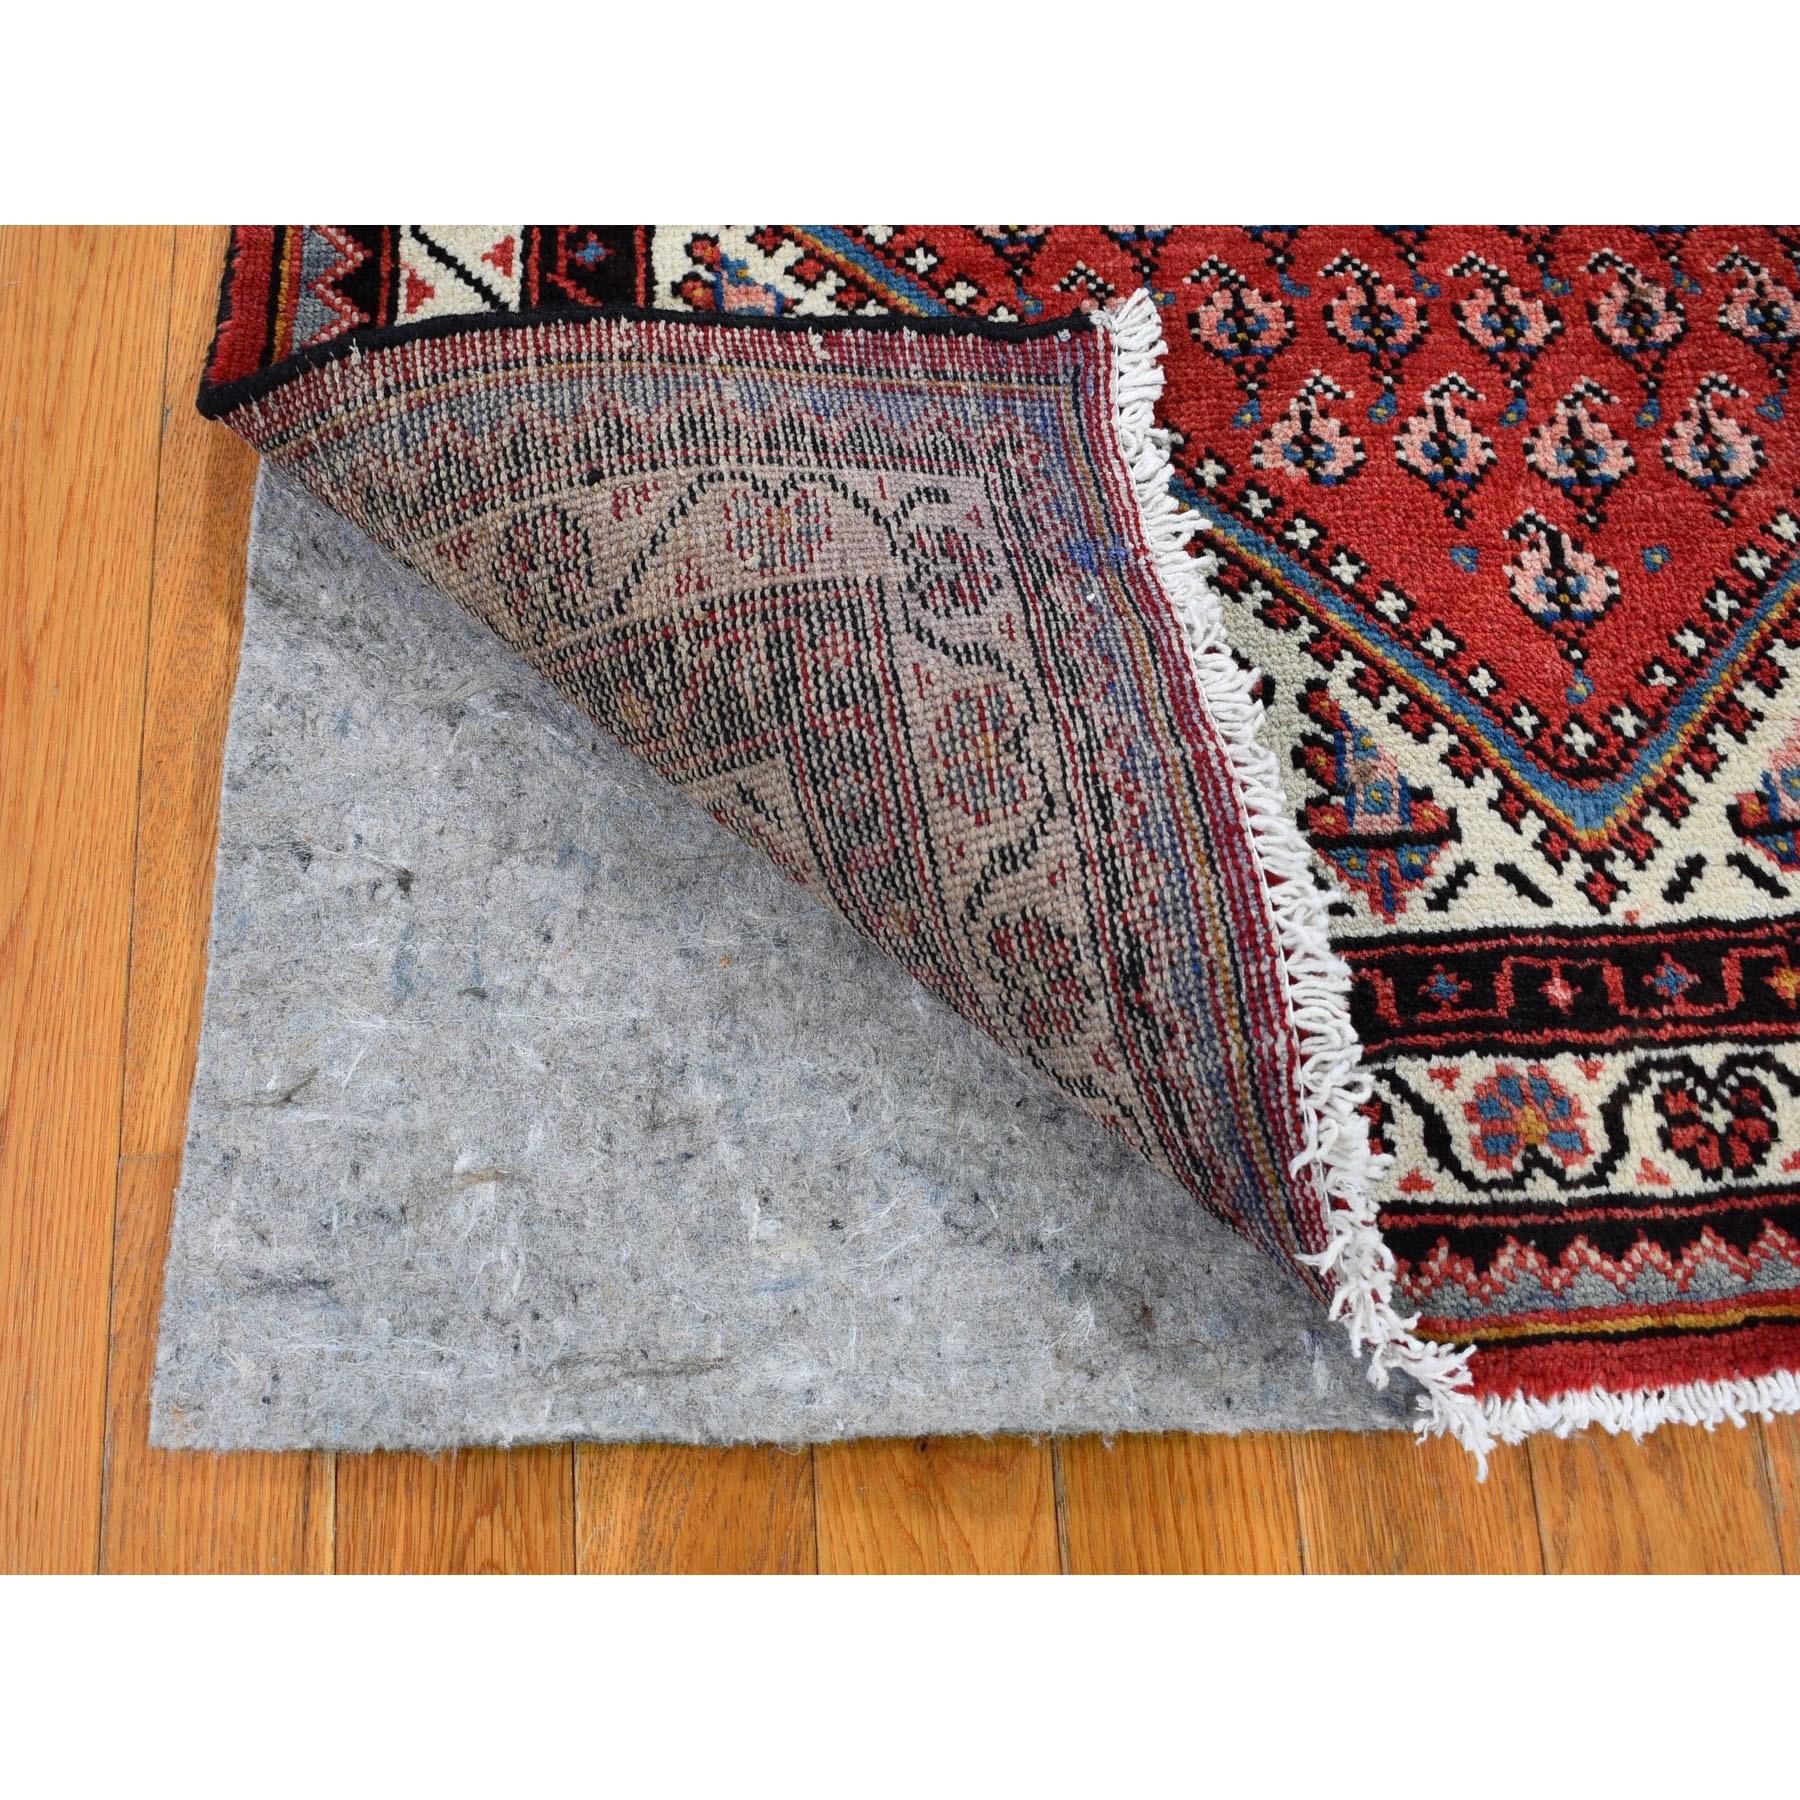 3-5 x5-2   Red Vinatge Pure Wool Sarouk Mir With Boteh Design Hand Knotted Oriental Rug 